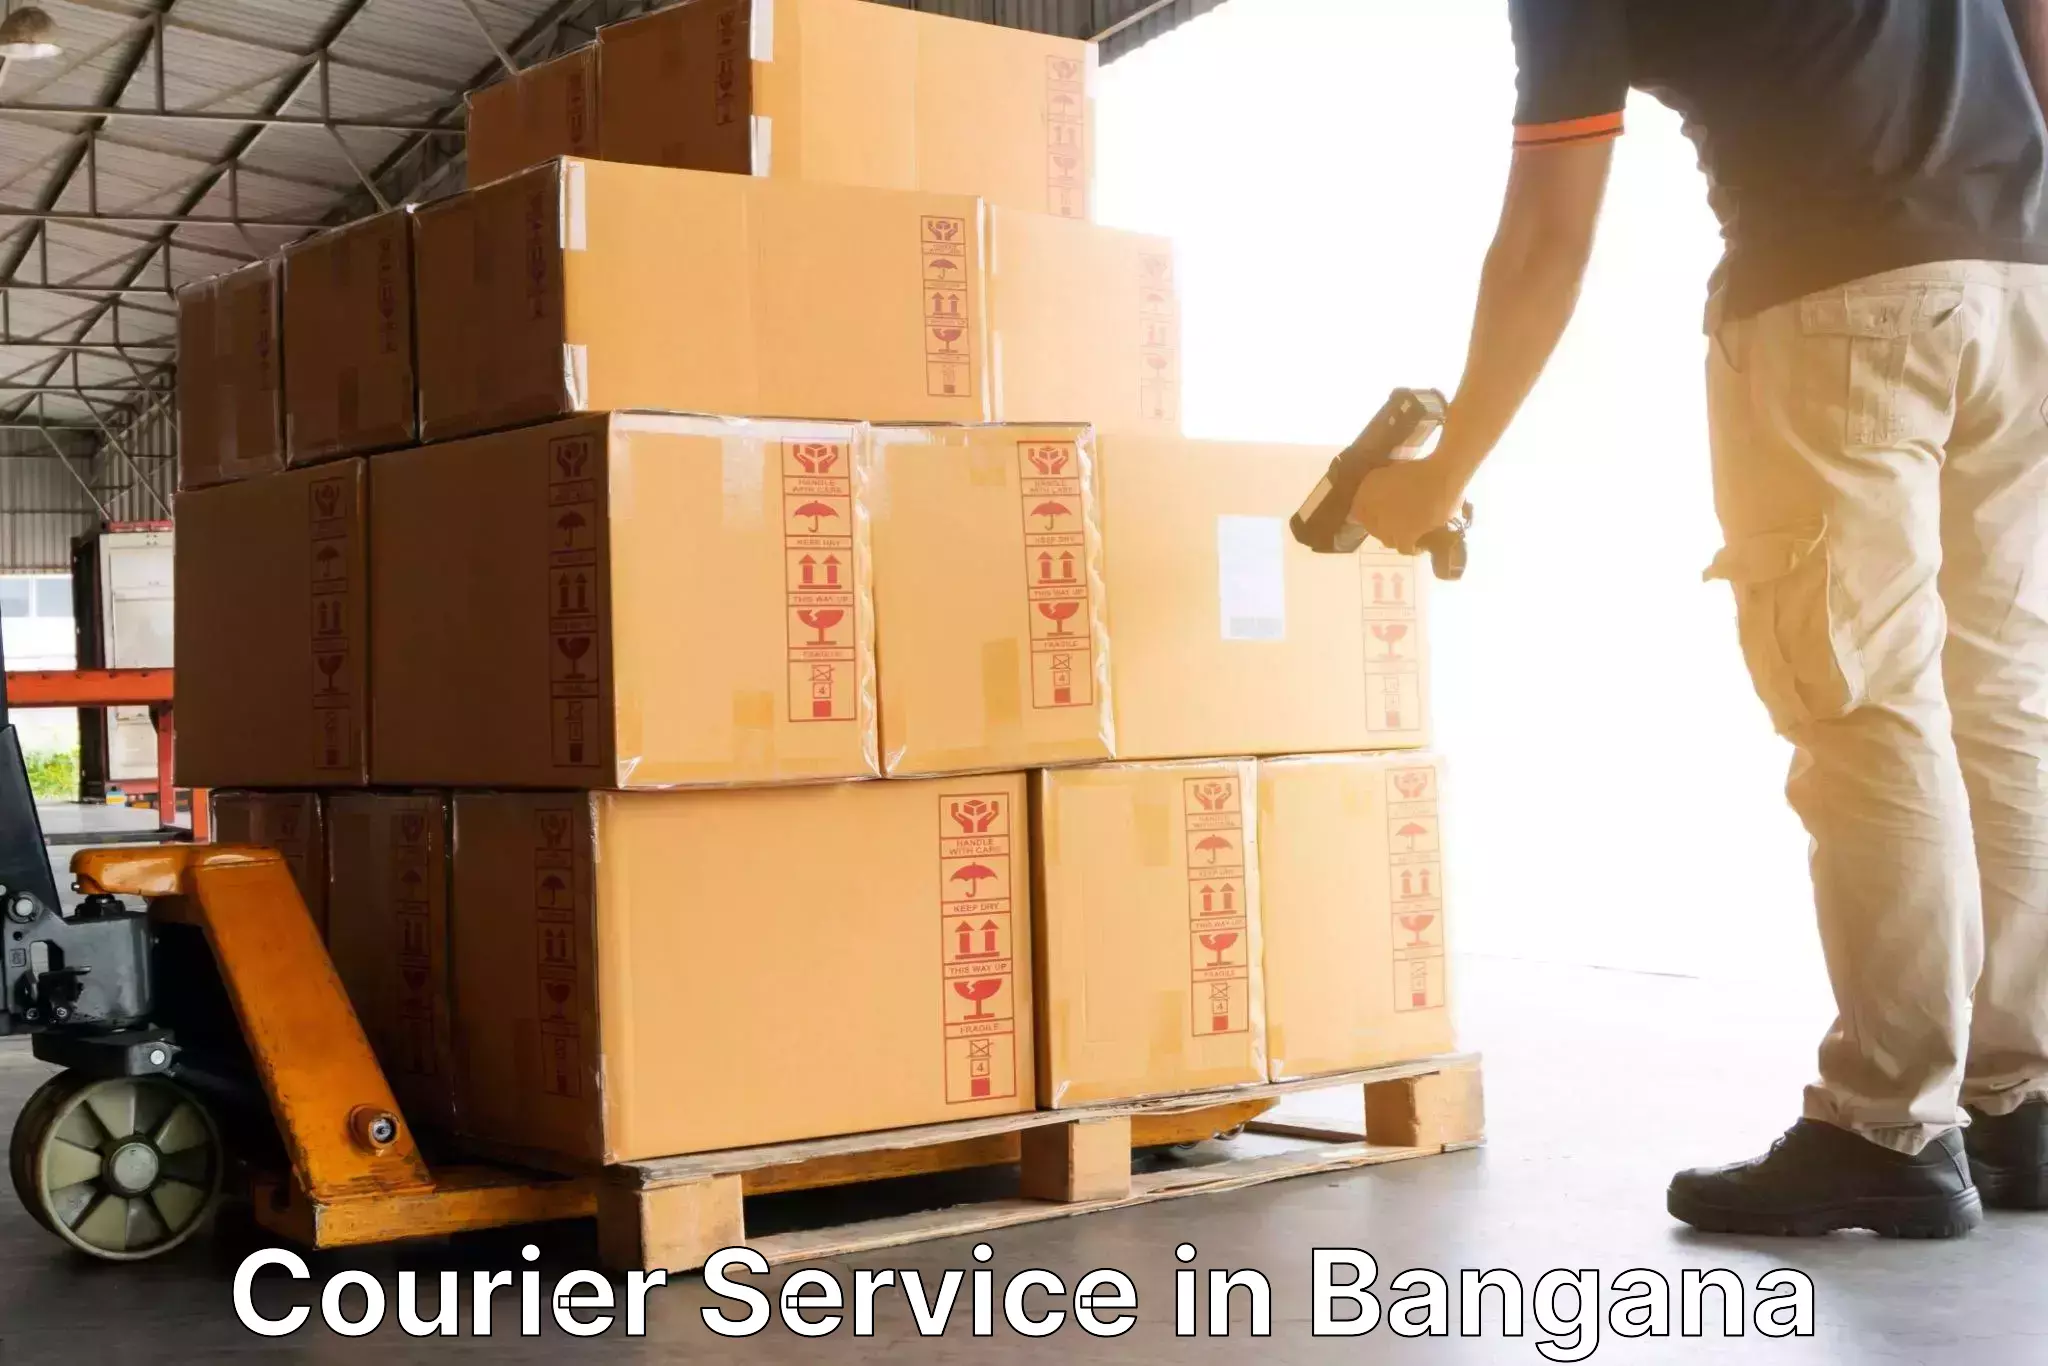 Streamlined delivery processes in Bangana